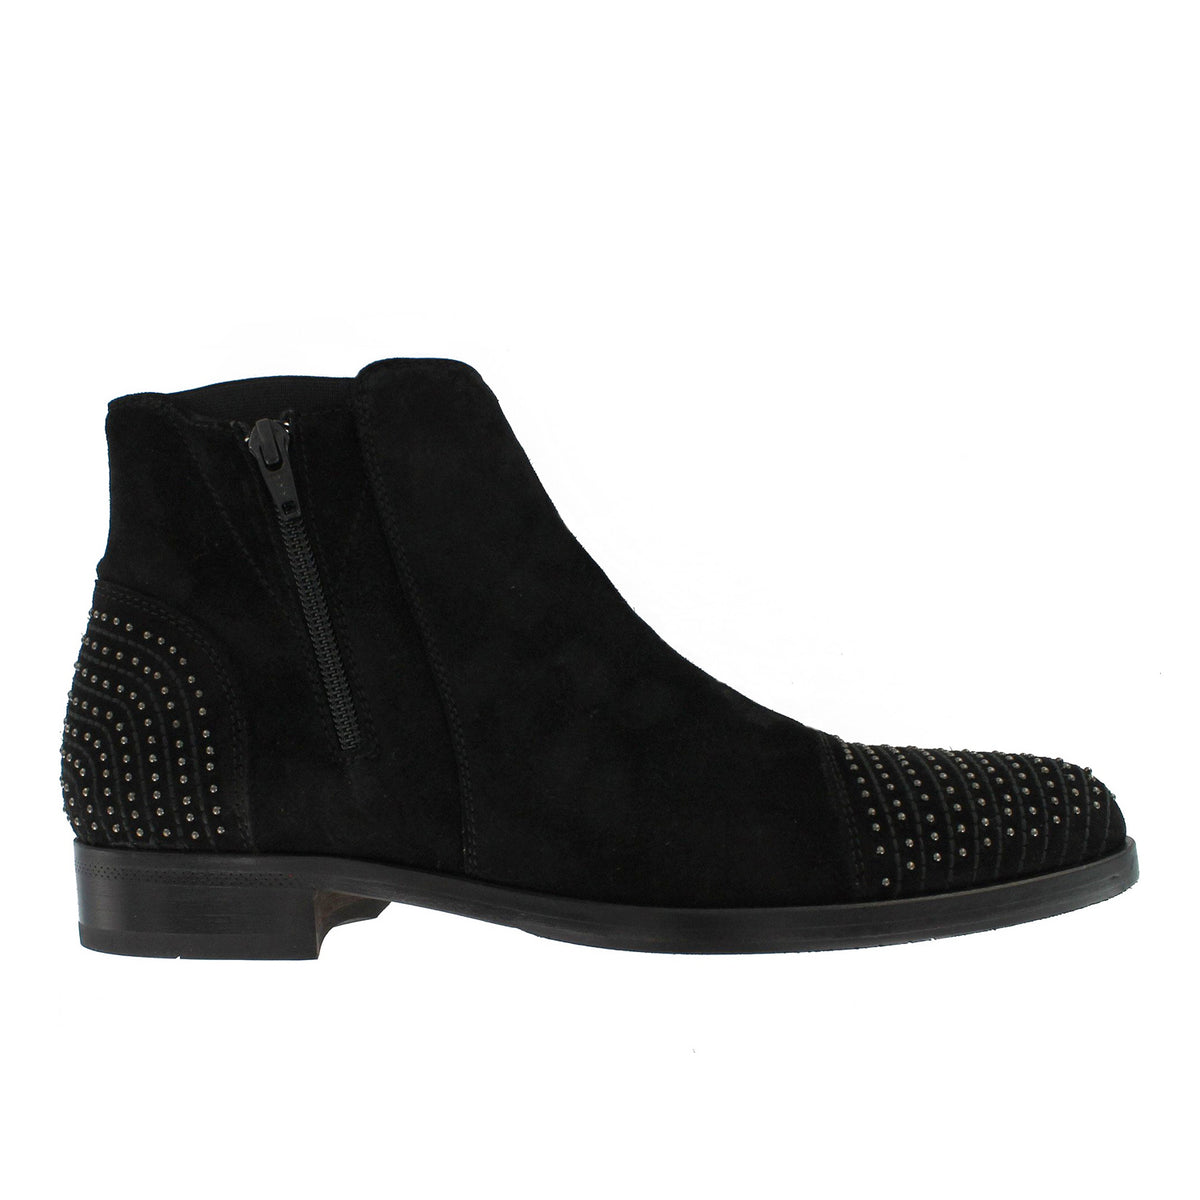 S5806 - Black Suede With Studs